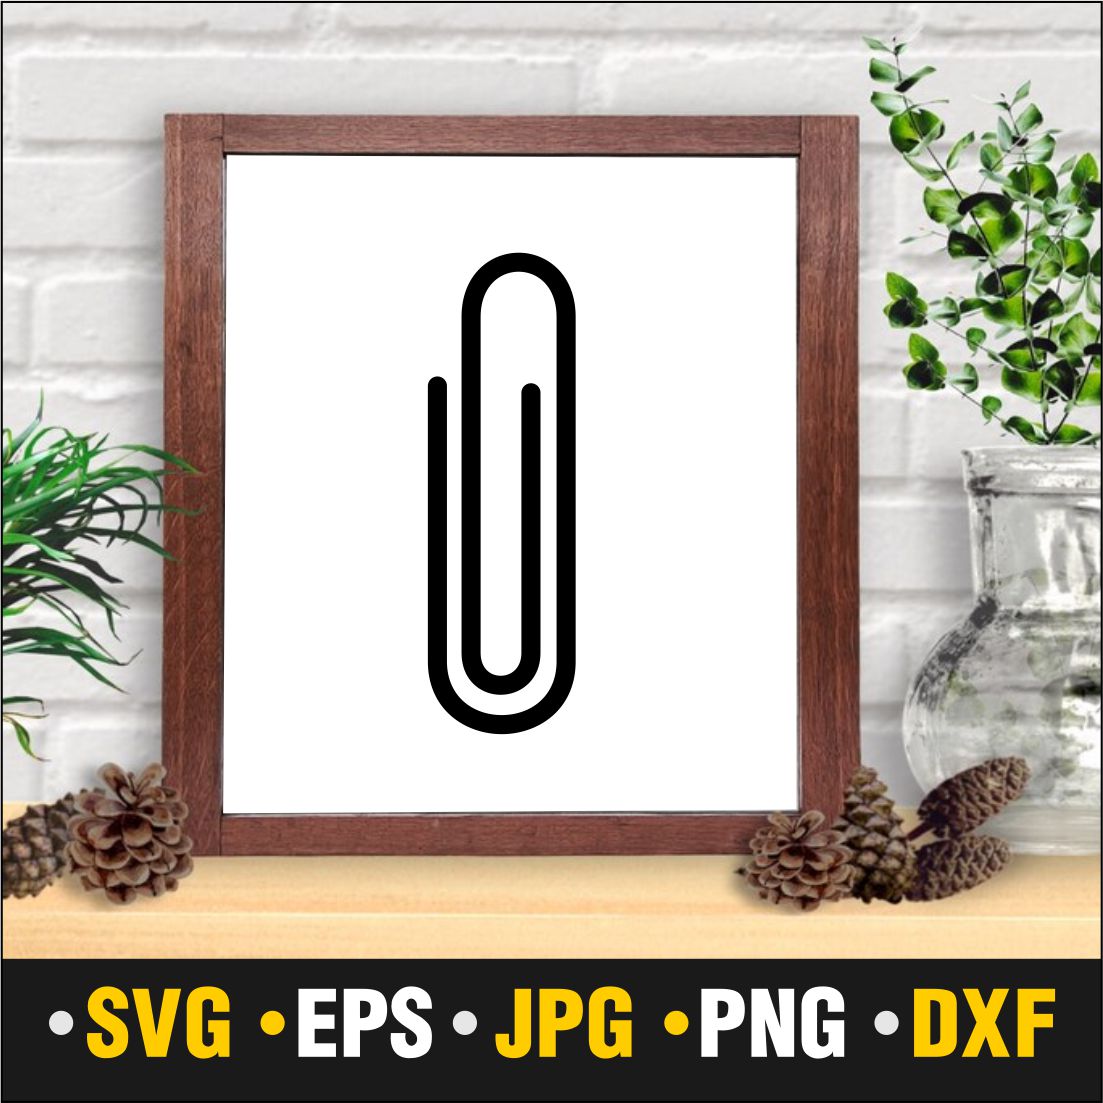 Paper Clip SVG, JPG , PNG, DXF, EPS cover image.